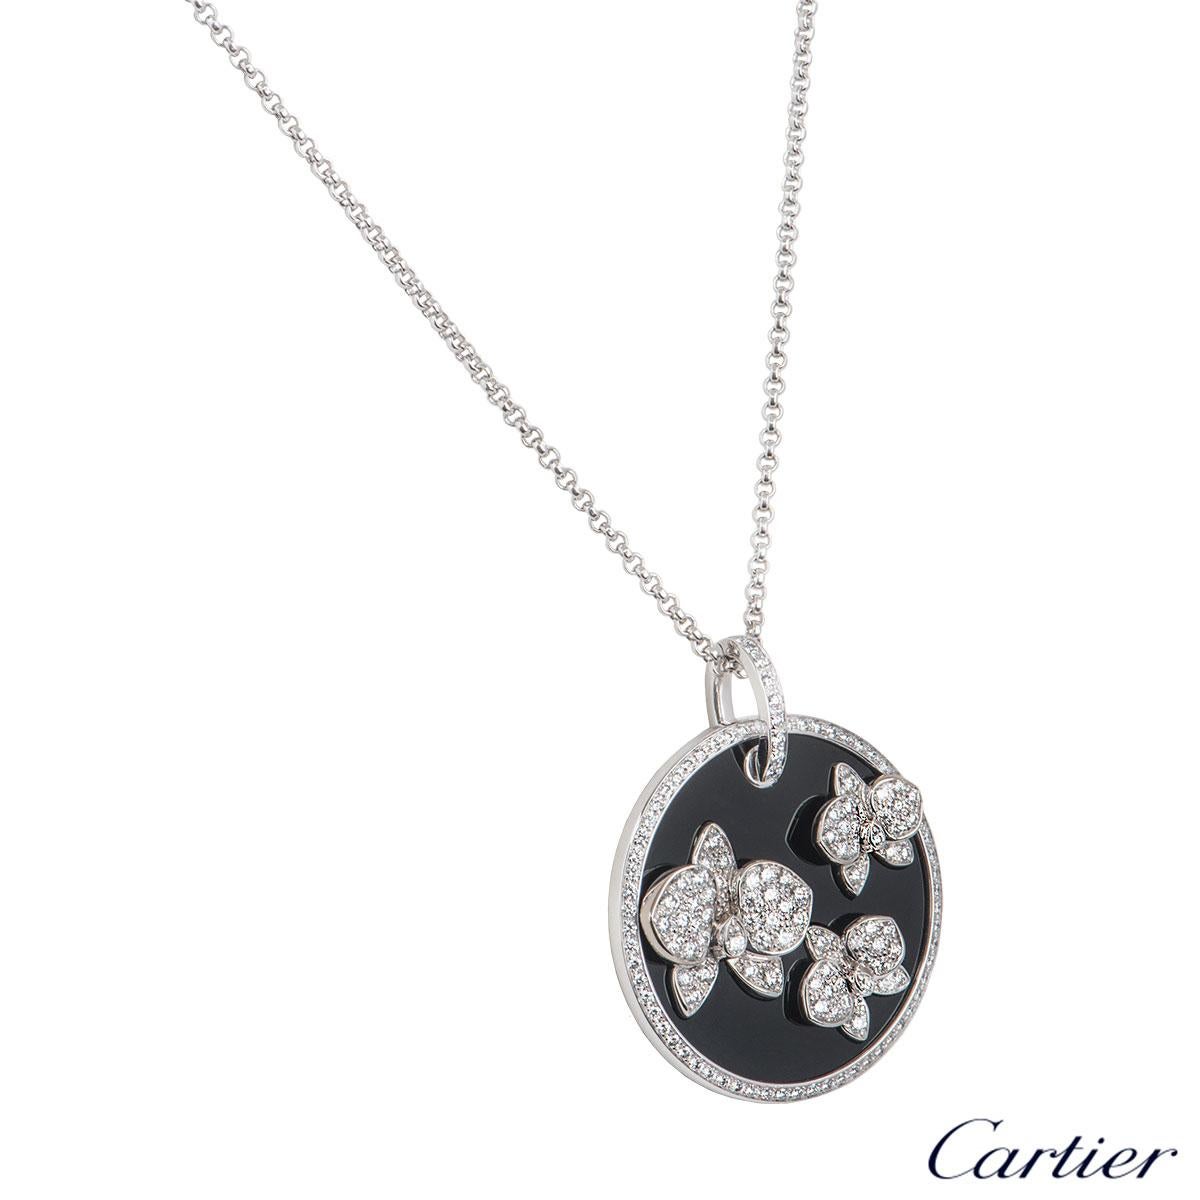 A beautiful 18k white gold diamond and onyx pendant by Cartier from the Caresse D'Orchidees collection. The pendant comprises of a circular onyx motif with 3 orchid motifs pave set with round brilliant cut diamonds. The pendant has 146 round